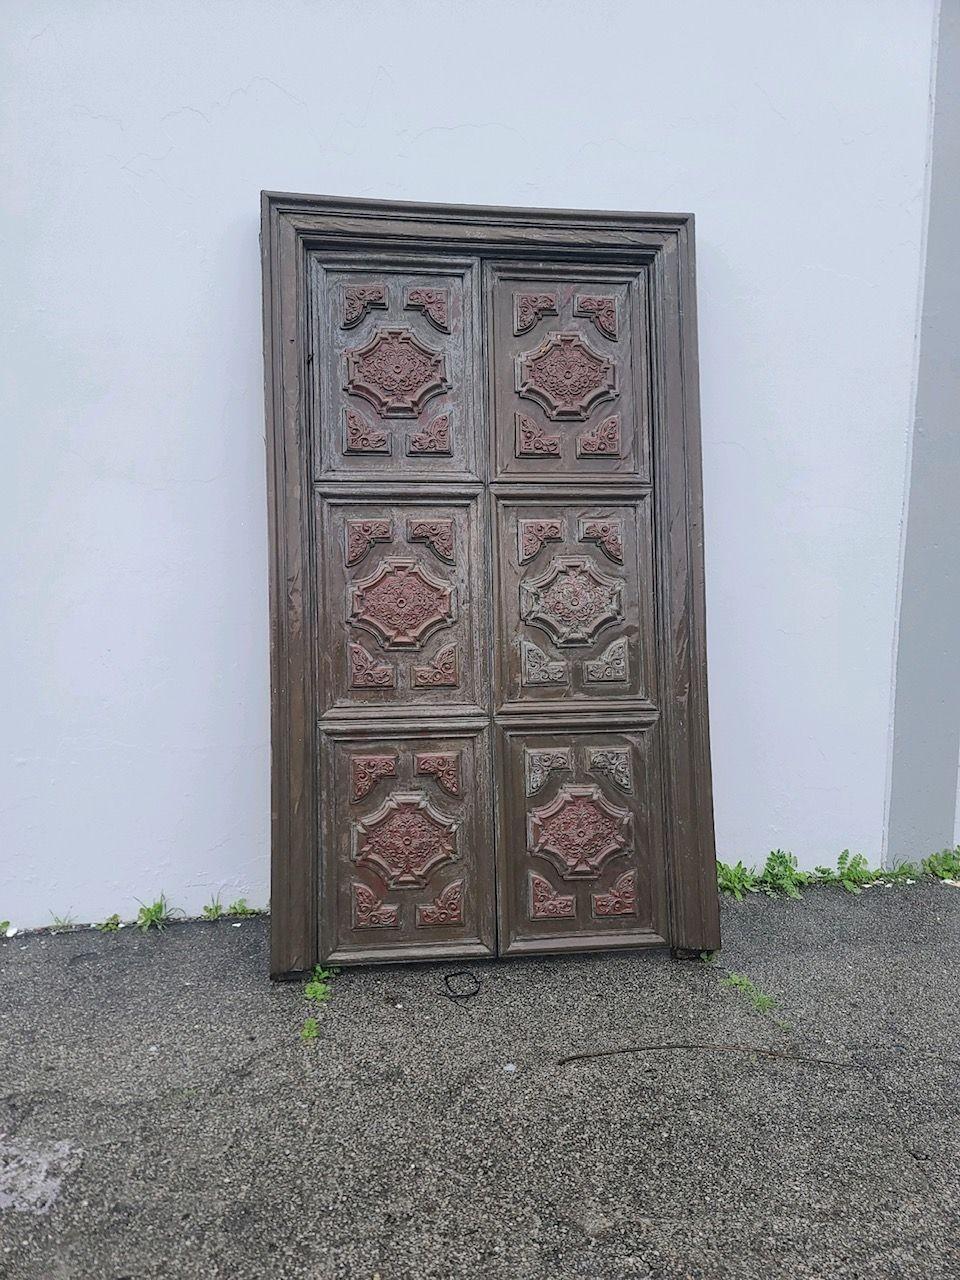 Large 8' multipaneled bronze-covered walnut interior double doors fixed to their original door frame featuring multiple regency crown molding along the front of each door face.

Doors on Frame: H 102